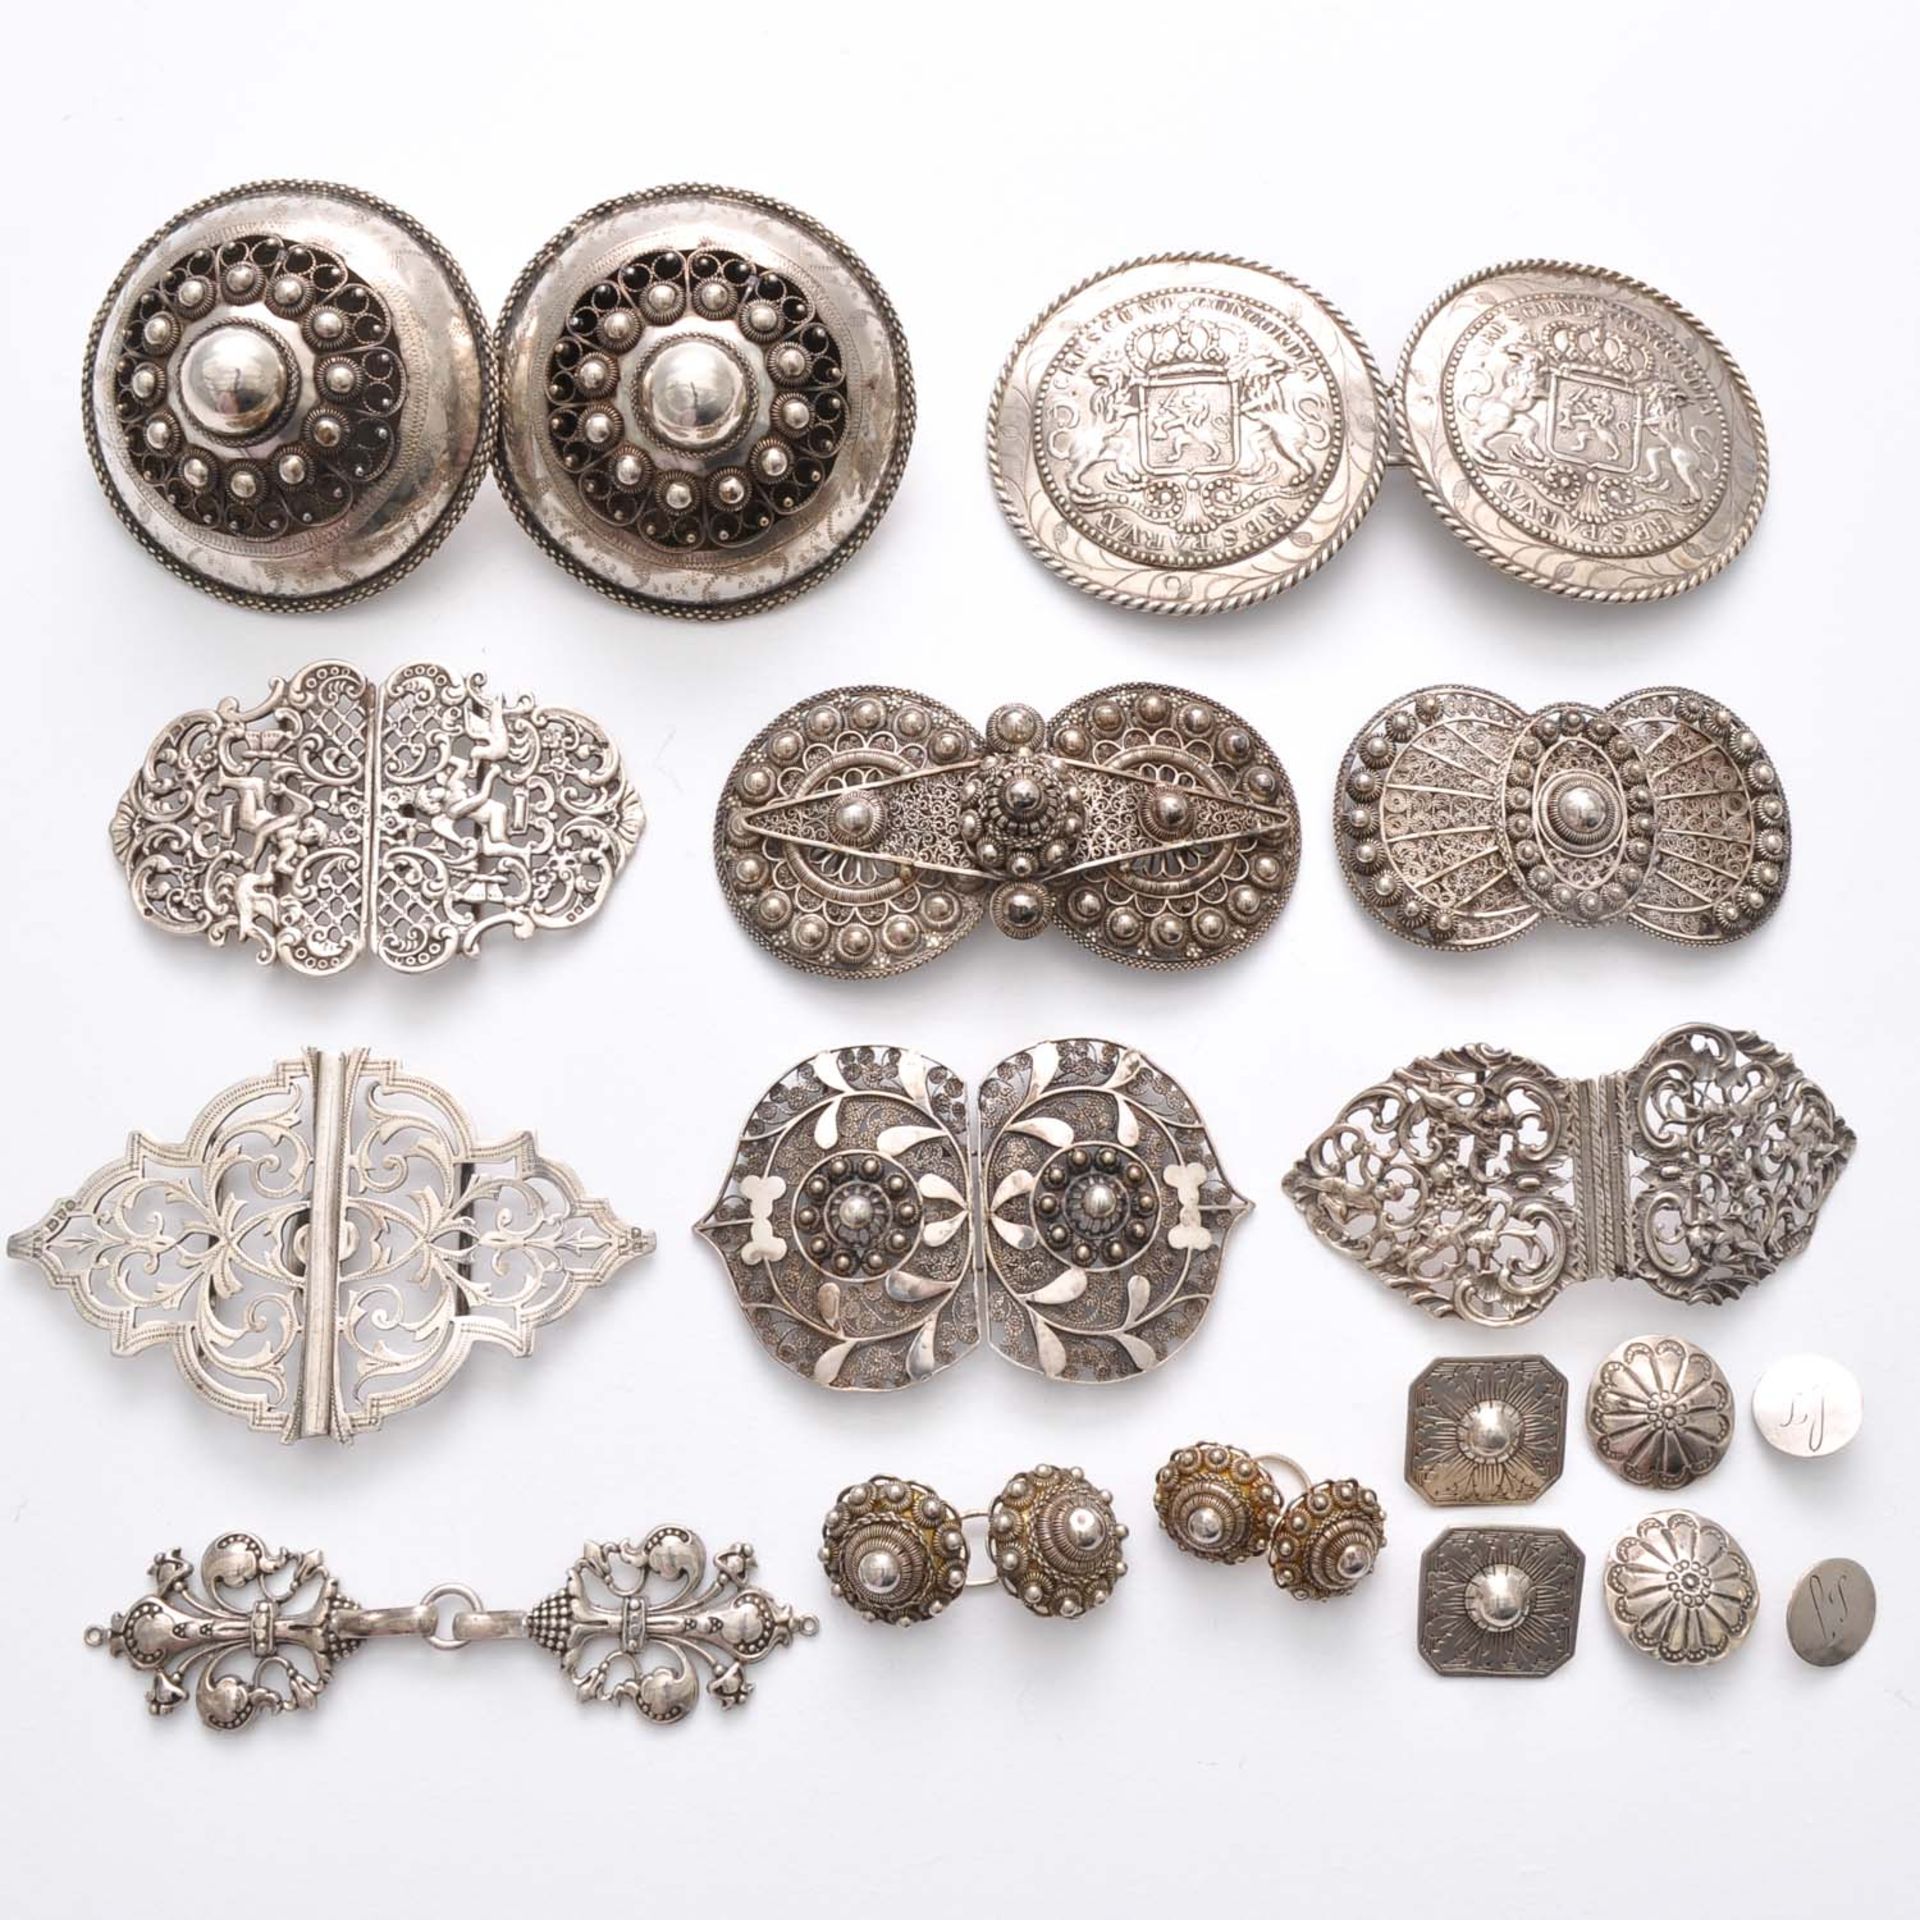 A Lot of Diverse Belt Buckles, Keelknopen and Clasps